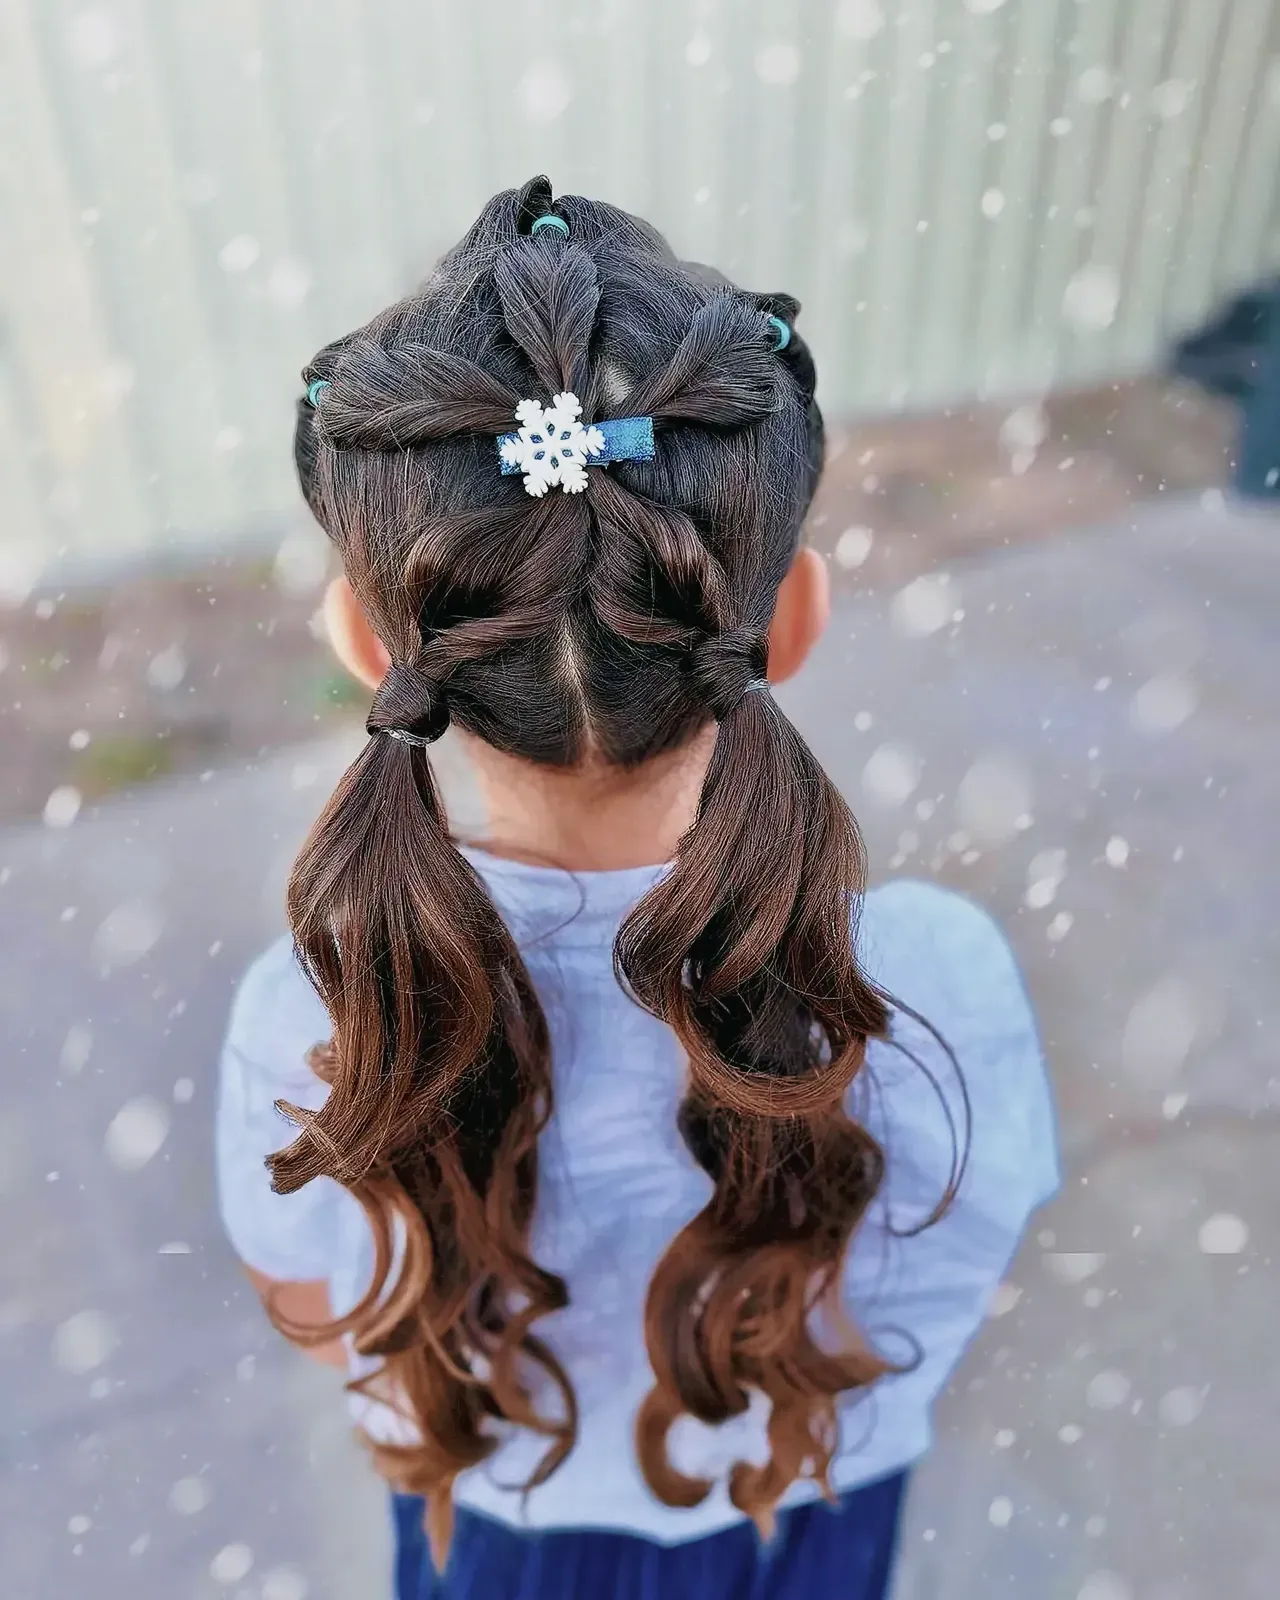 Young woman with snowflake hair clip in a winter wonderland hairstyle.